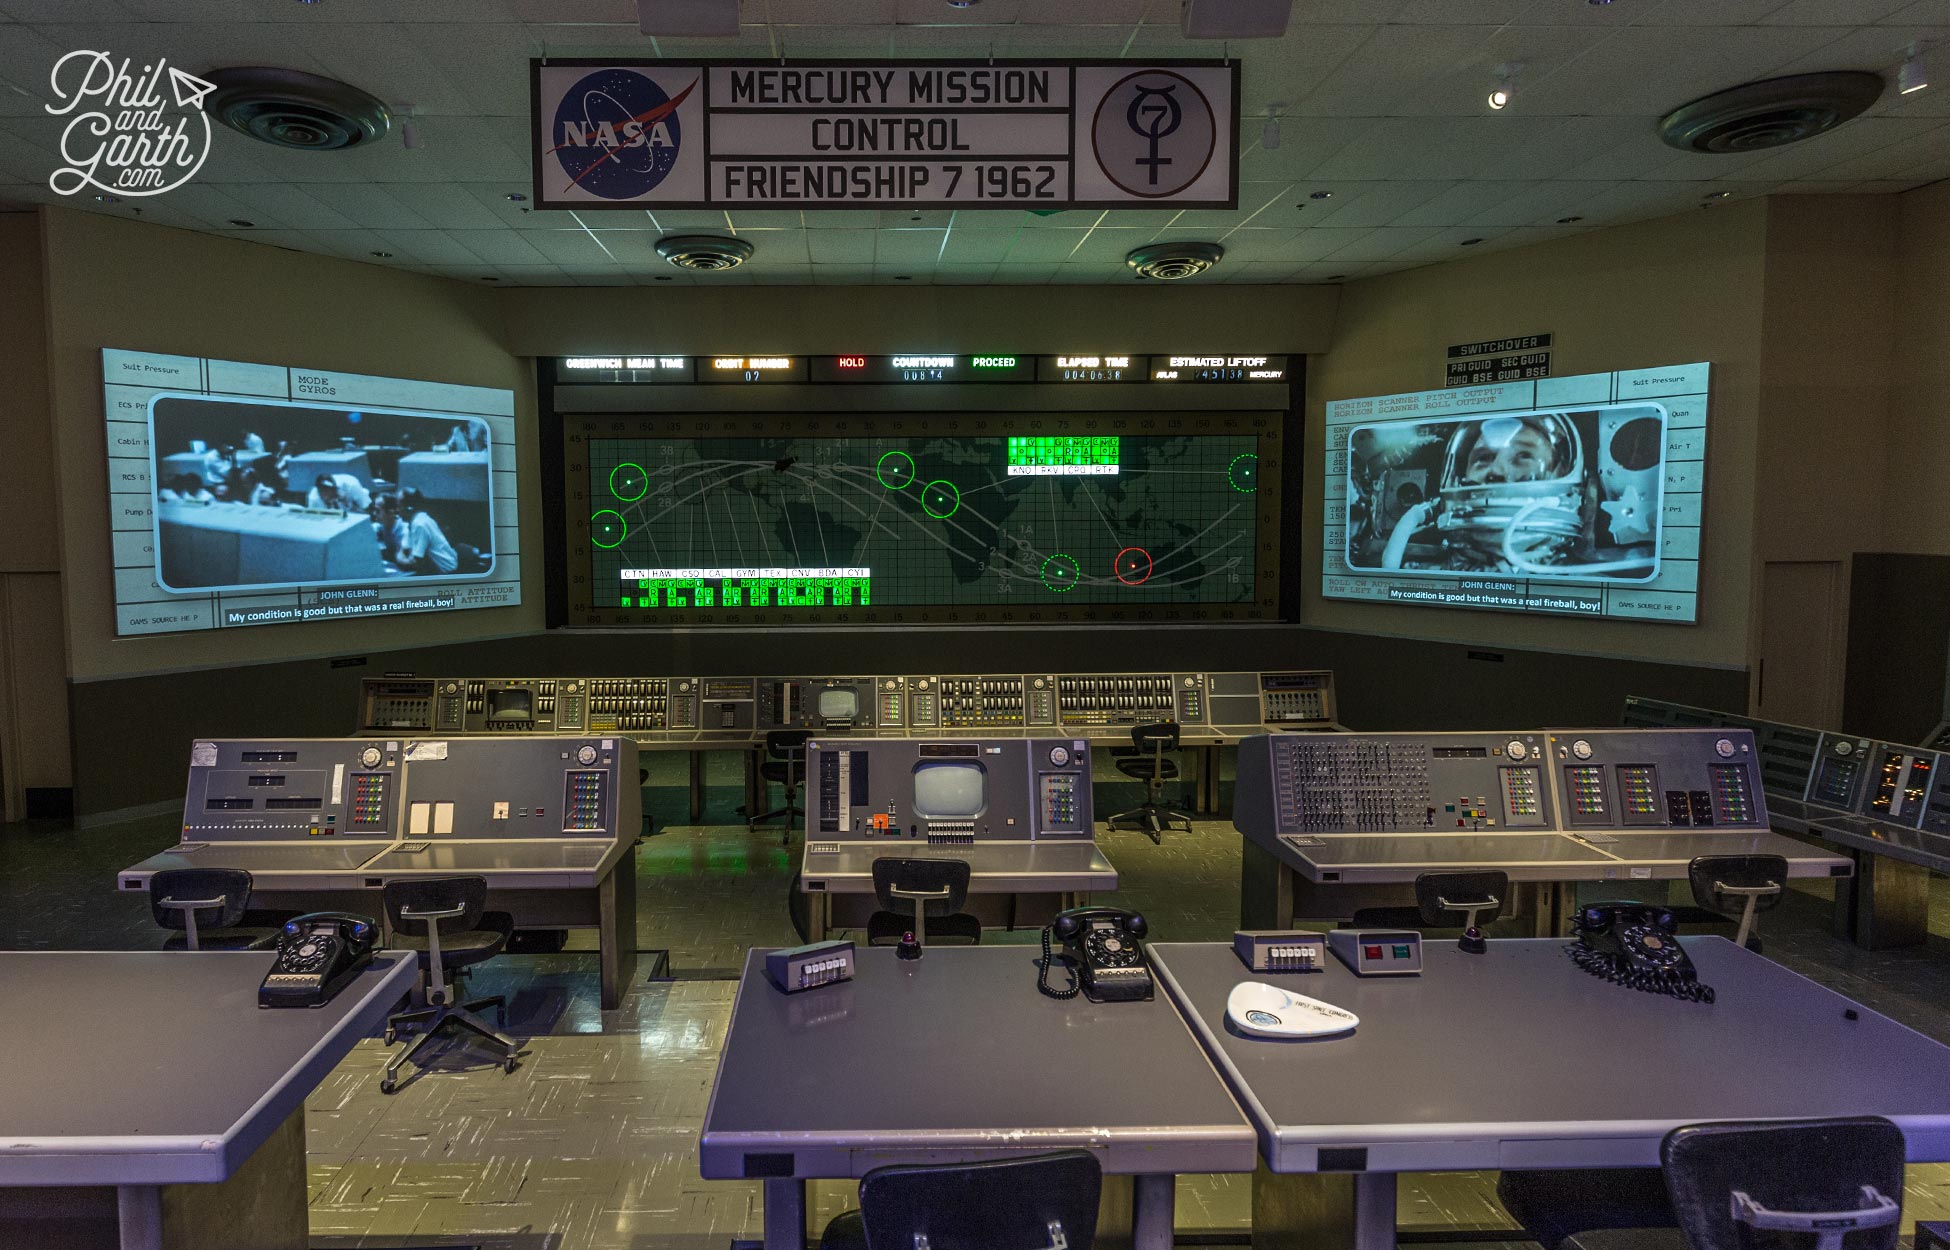 Recreation of the Mercury mission control room